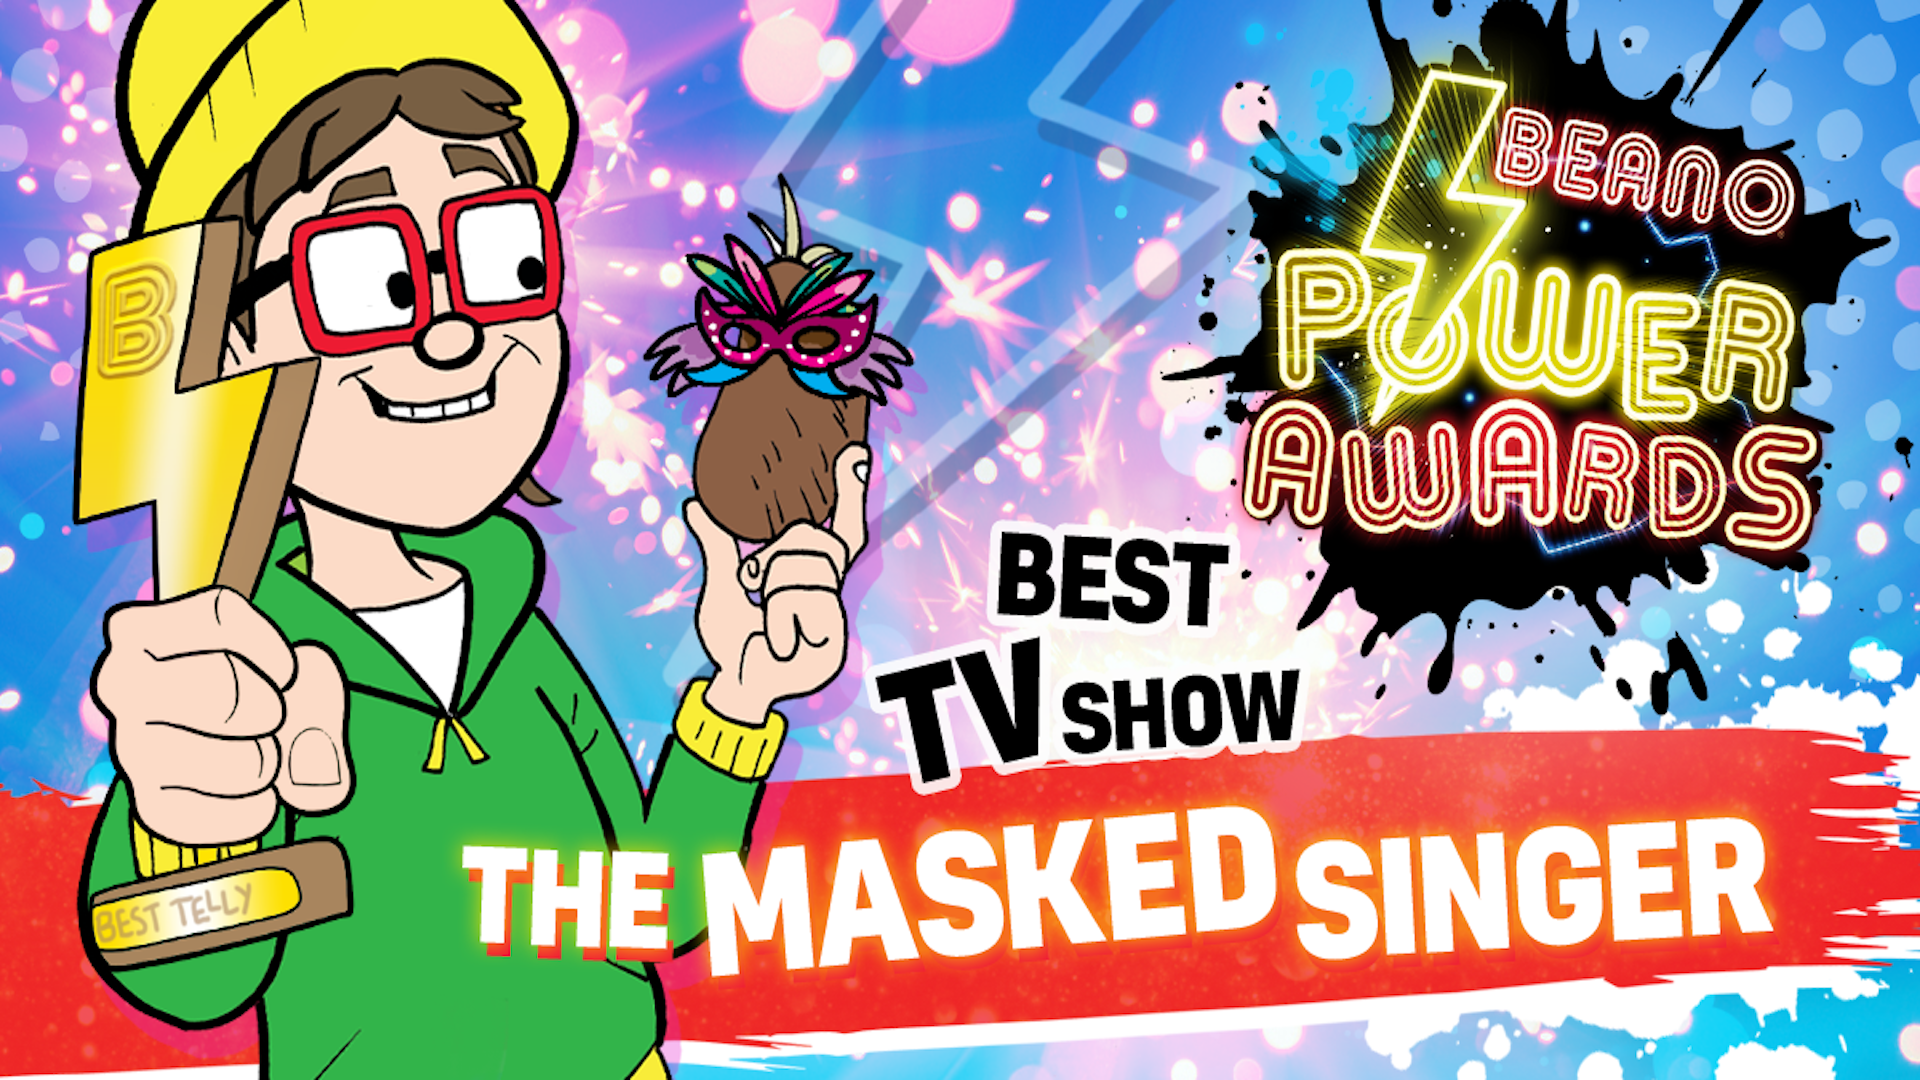 Best Show of the Year: Beano Power Awards 2020